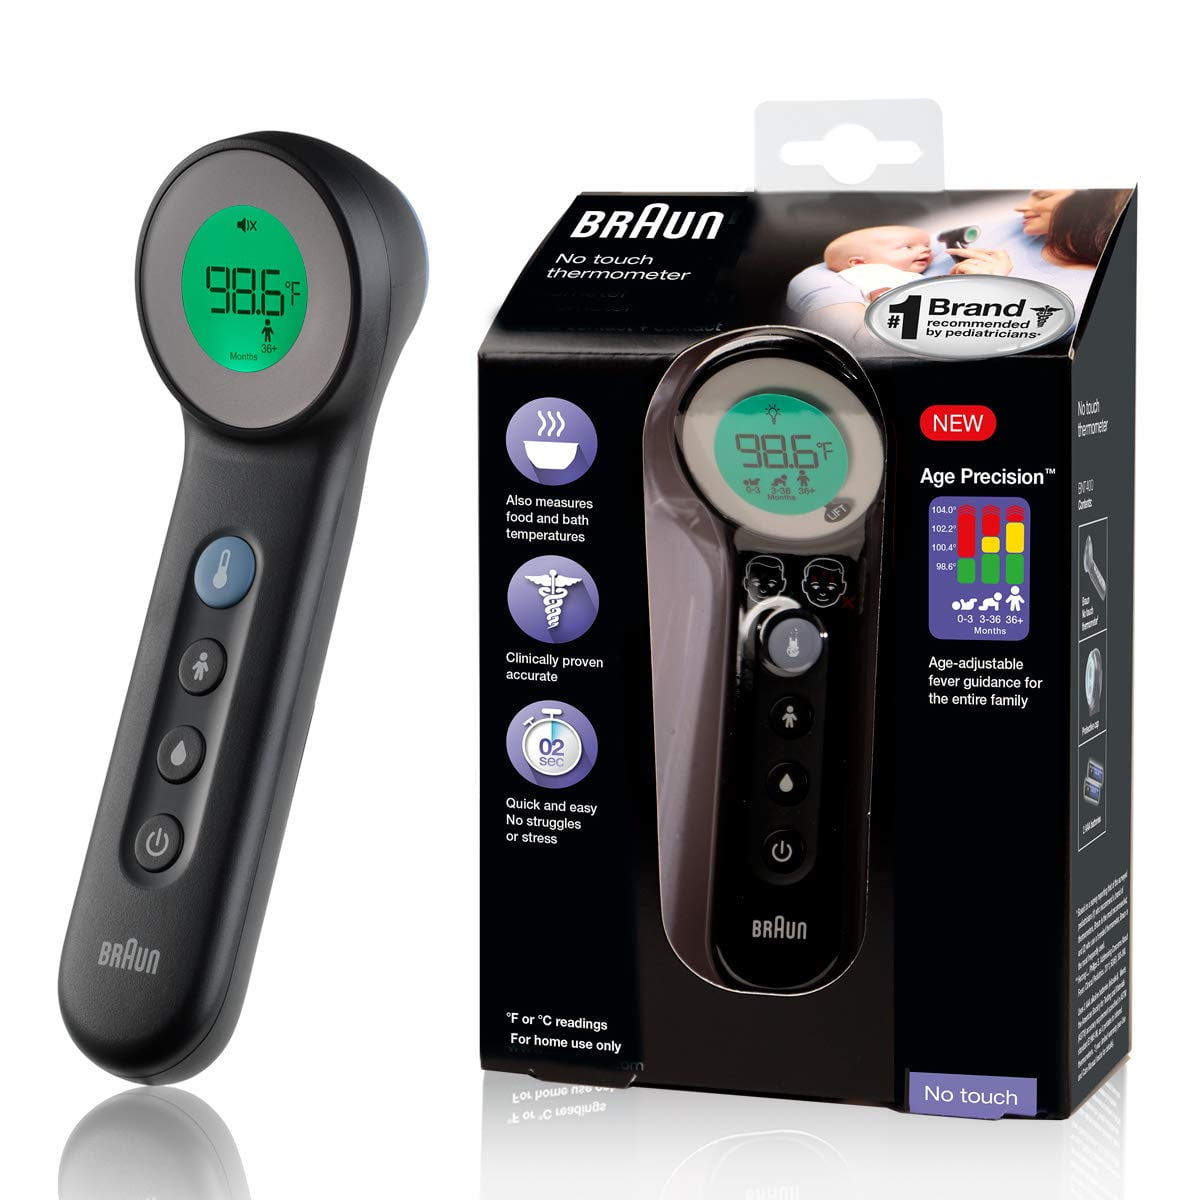 BearCare, Inc. Recalls Rechargeable Walnut Wearable Smart Thermometers for  Risks of Serious Injury, including Burns During Use